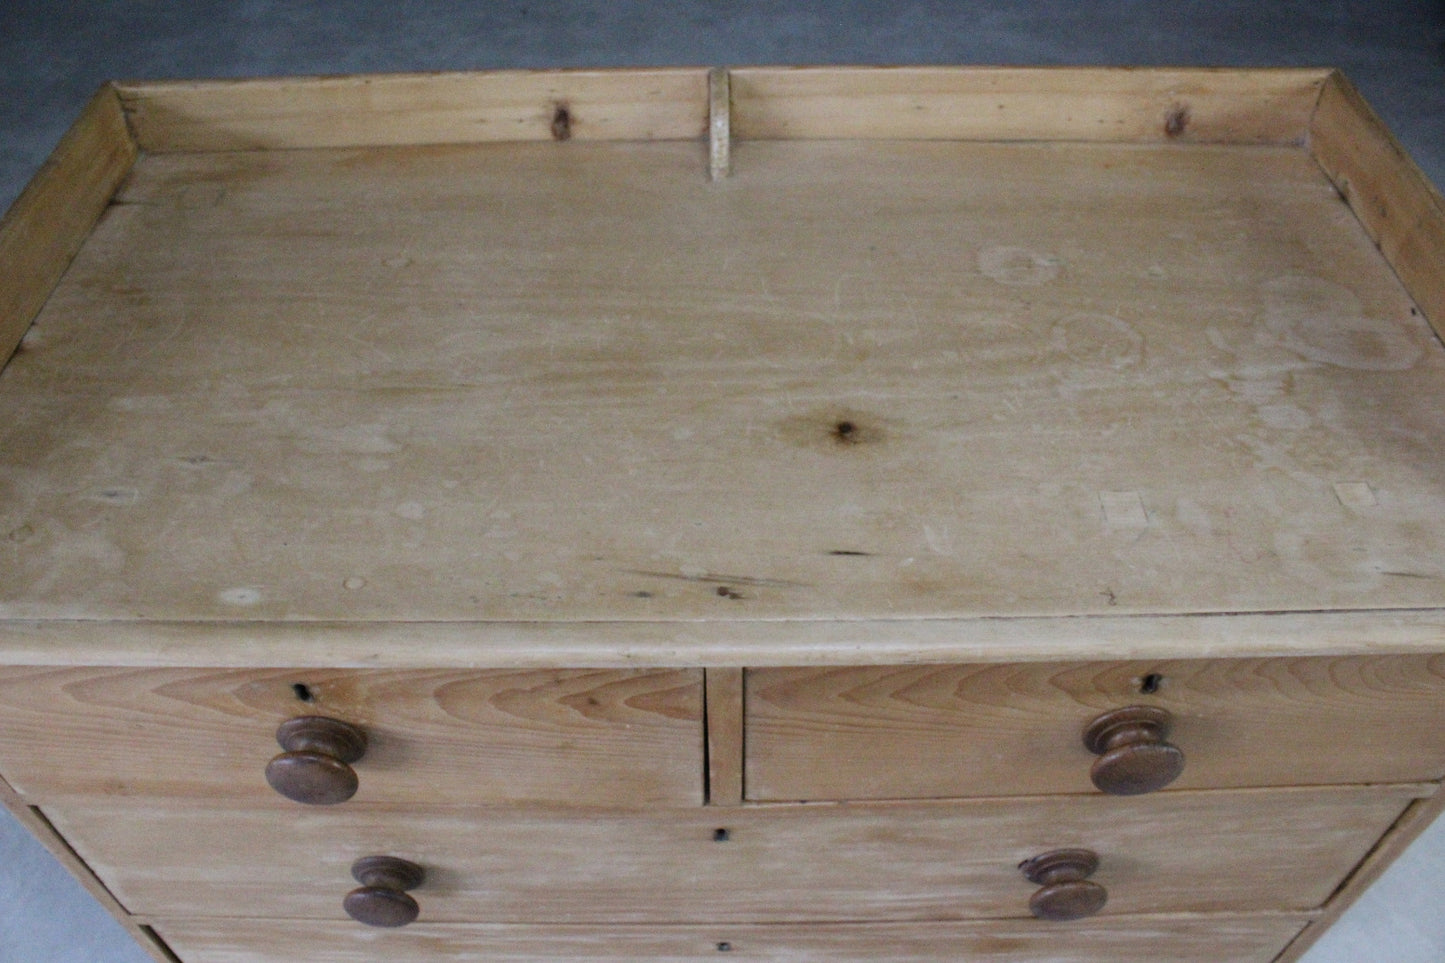 Antique Pine Washstand Chest of Drawers - Kernow Furniture